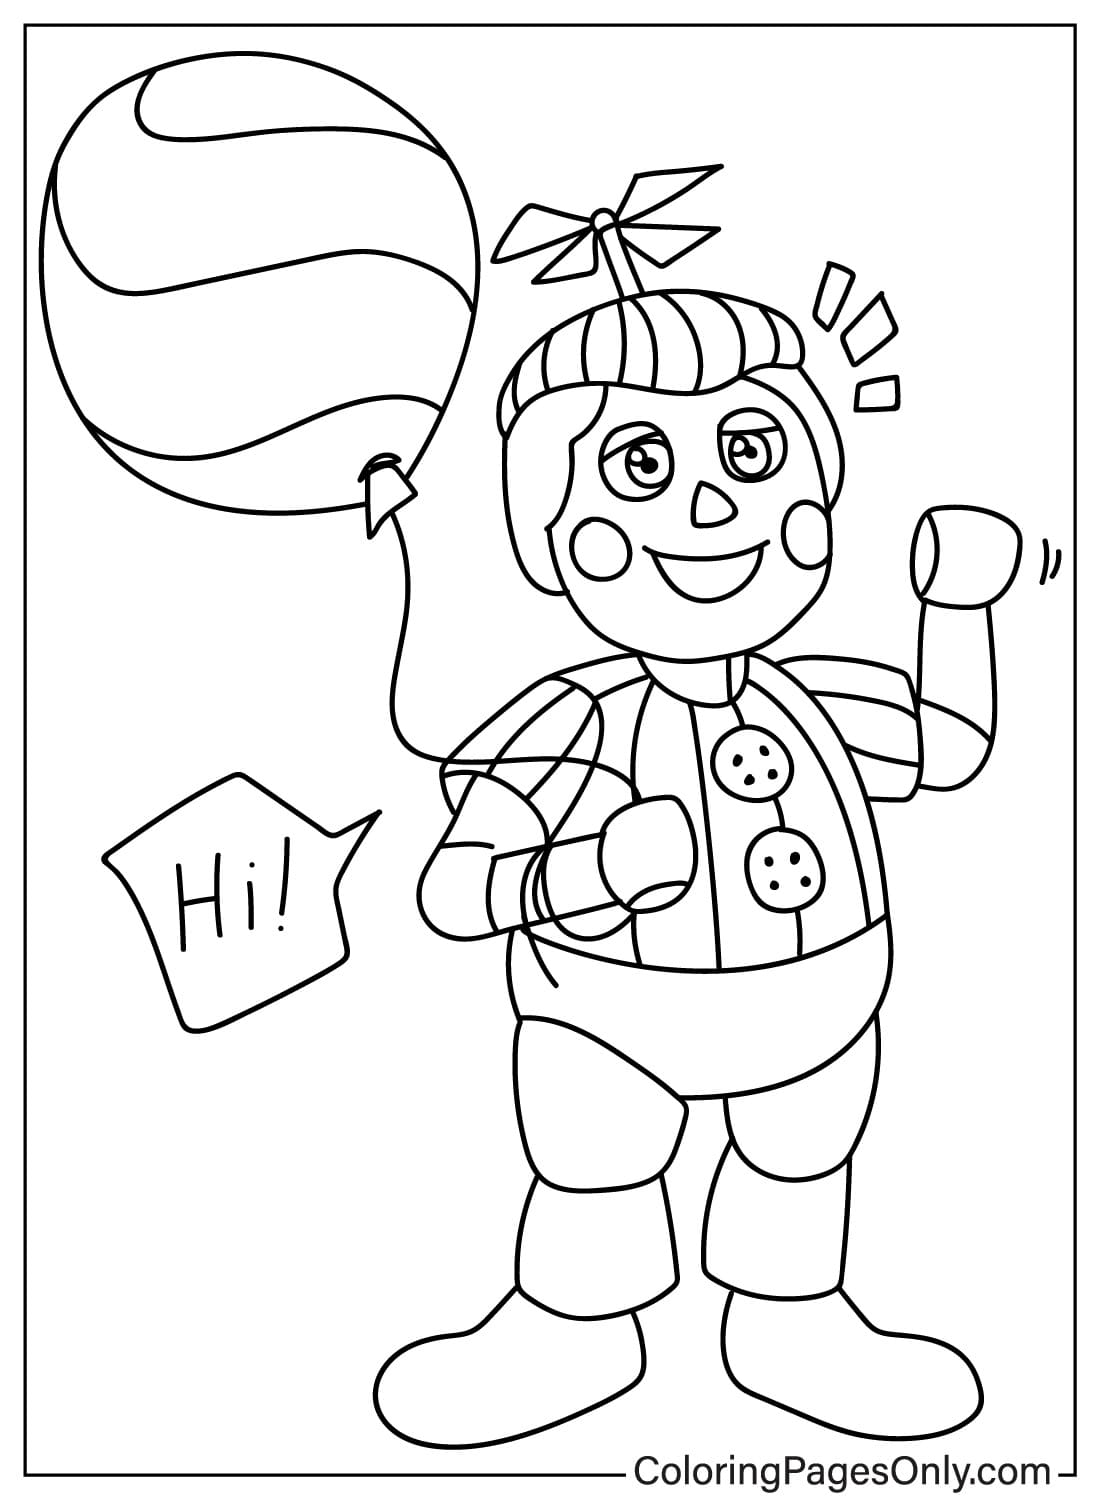 Balloon Boy Coloring Page Free - Free Printable Coloring Pages